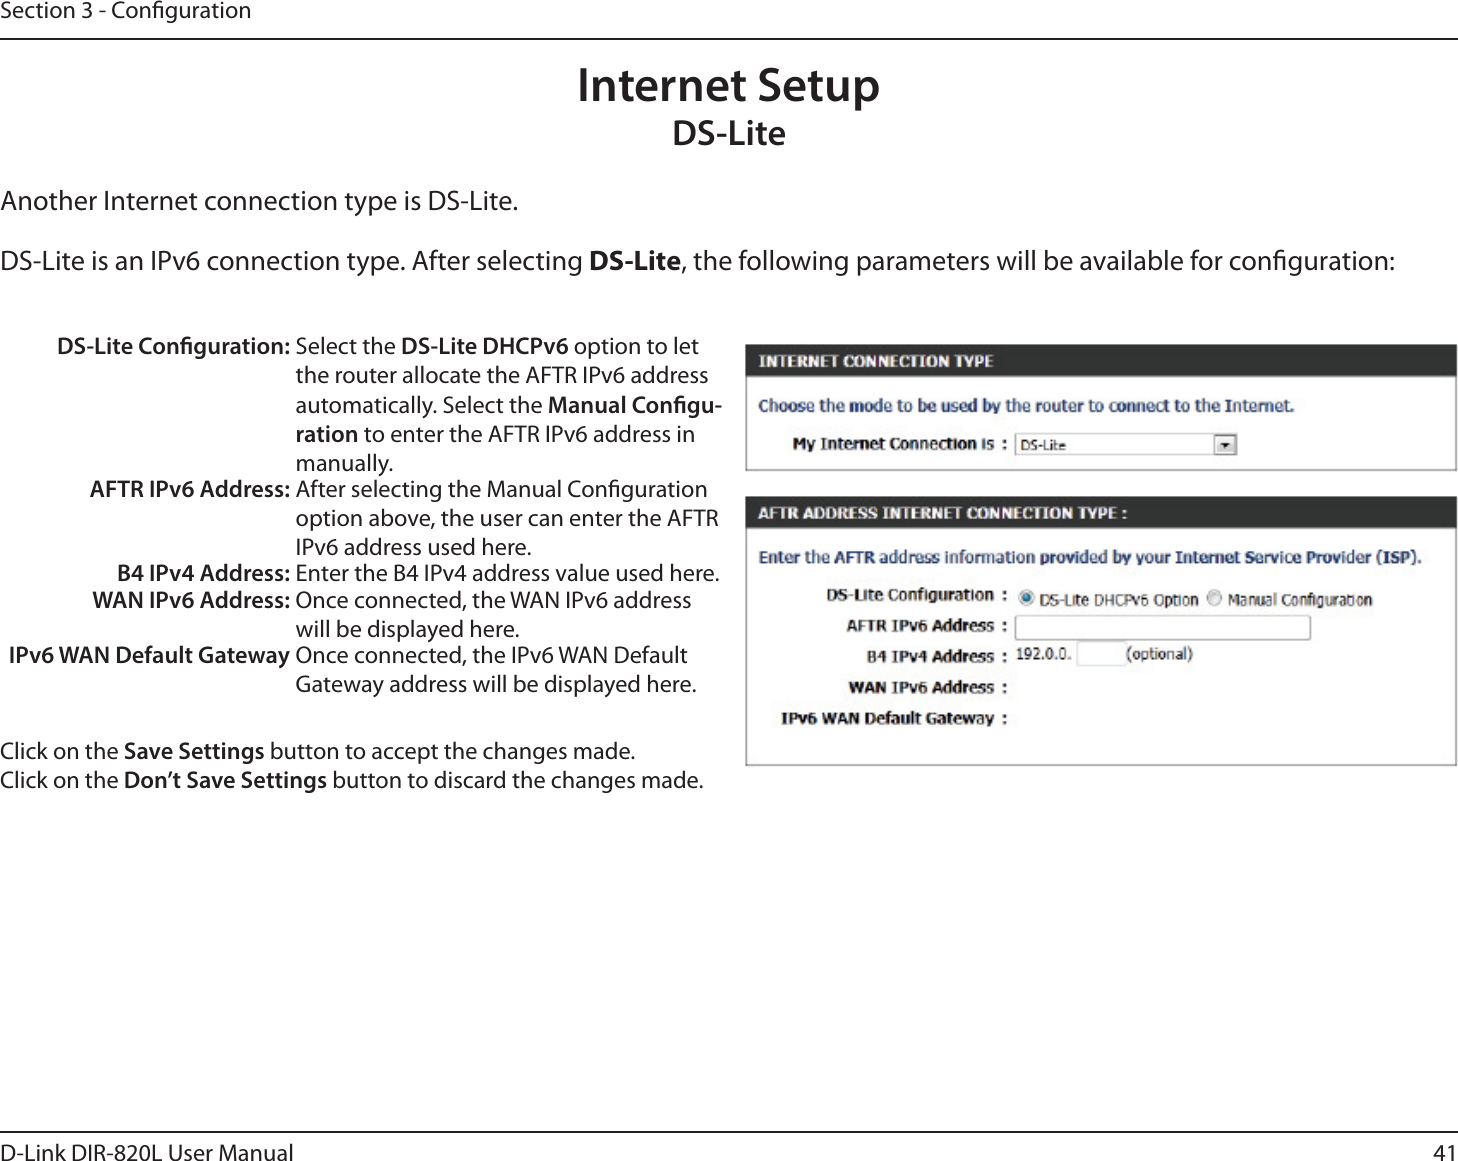 41D-Link DIR-820L User ManualSection 3 - CongurationInternet SetupDS-LiteAnother Internet connection type is DS-Lite.DS-Lite is an IPv6 connection type. After selecting DS-Lite, the following parameters will be available for conguration:DS-Lite Conguration: Select the DS-Lite DHCPv6 option to let the router allocate the AFTR IPv6 address automatically. Select the Manual Congu-ration to enter the AFTR IPv6 address in manually.AFTR IPv6 Address: After selecting the Manual Conguration option above, the user can enter the AFTR IPv6 address used here.B4 IPv4 Address: Enter the B4 IPv4 address value used here.WAN IPv6 Address: Once connected, the WAN IPv6 address will be displayed here.IPv6 WAN Default Gateway Once connected, the IPv6 WAN Default Gateway address will be displayed here.Click on the Save Settings button to accept the changes made.Click on the Don’t Save Settings button to discard the changes made.